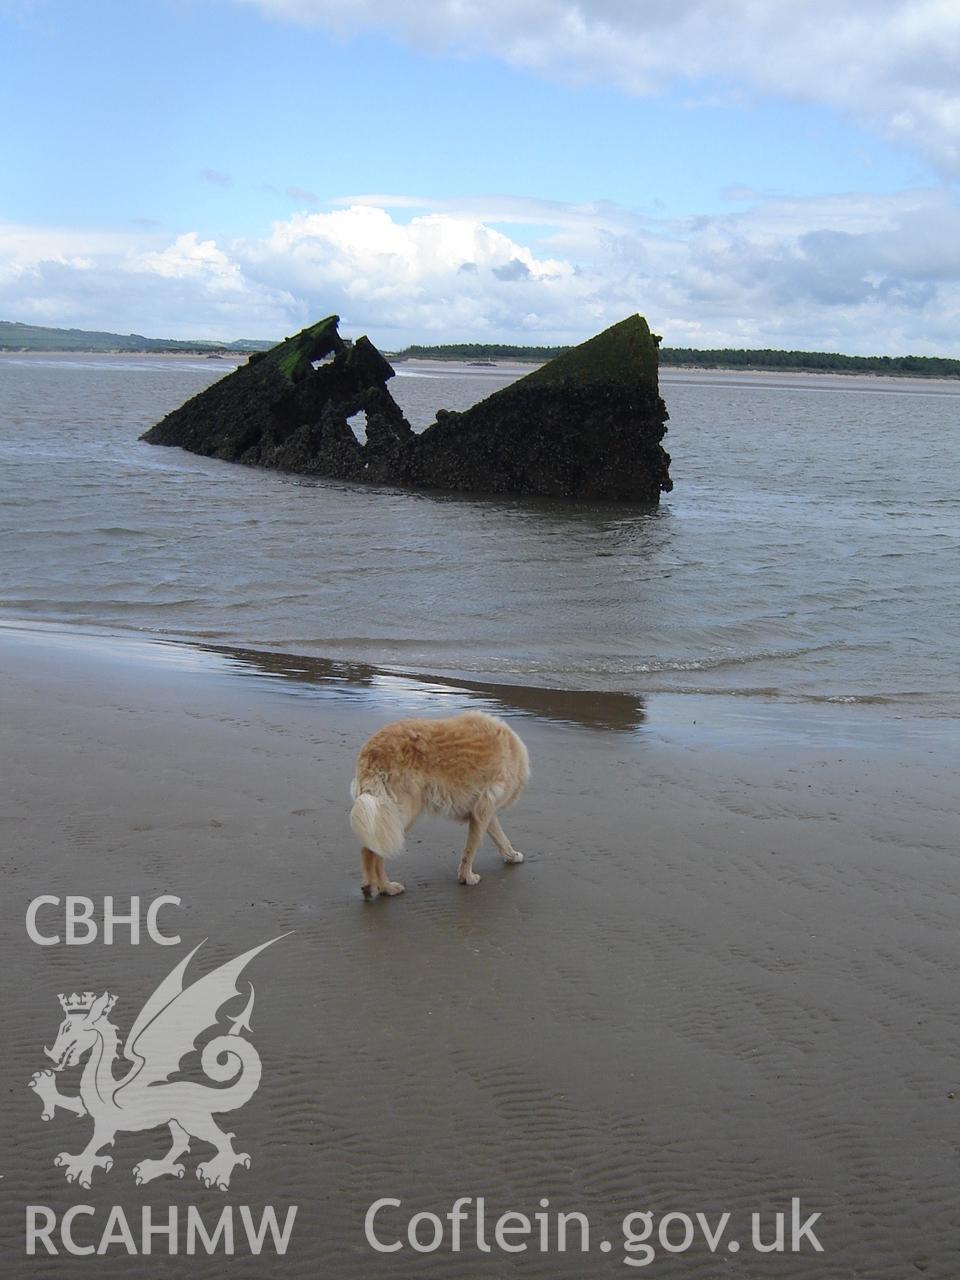 Digital photograph showing the wreck of the Teviotdale on Cefn Sidan Beach, produced by Ian Cundy, August 2010